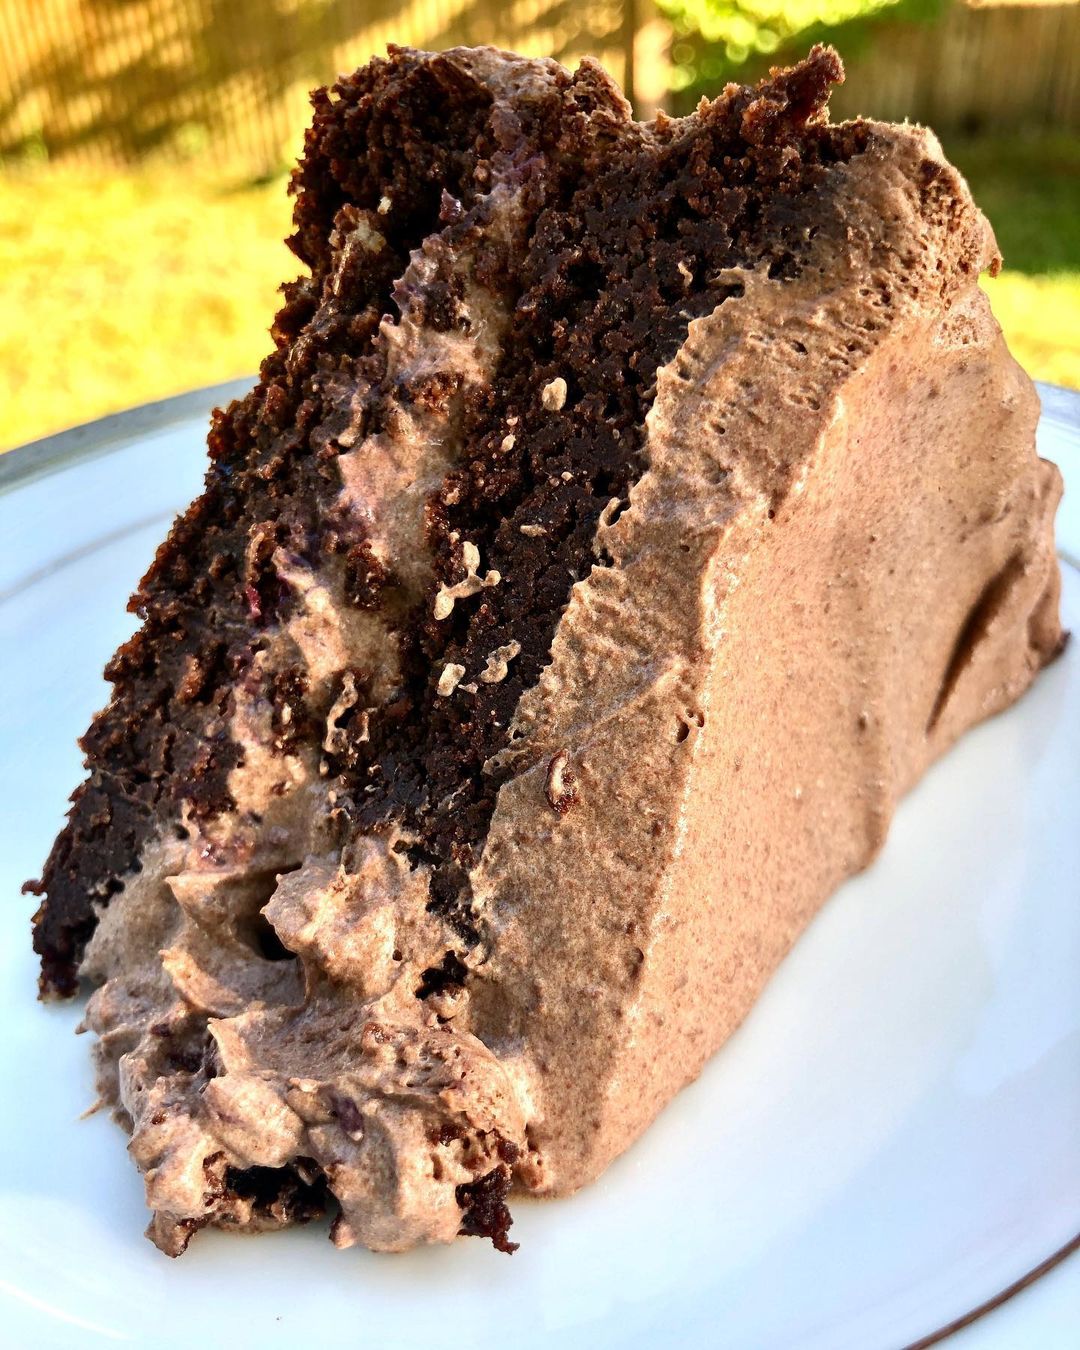 Vegan | Paleo | Gluten Free Espresso Brownie Cake with Chocolate Mousse Whipped “Frosting”